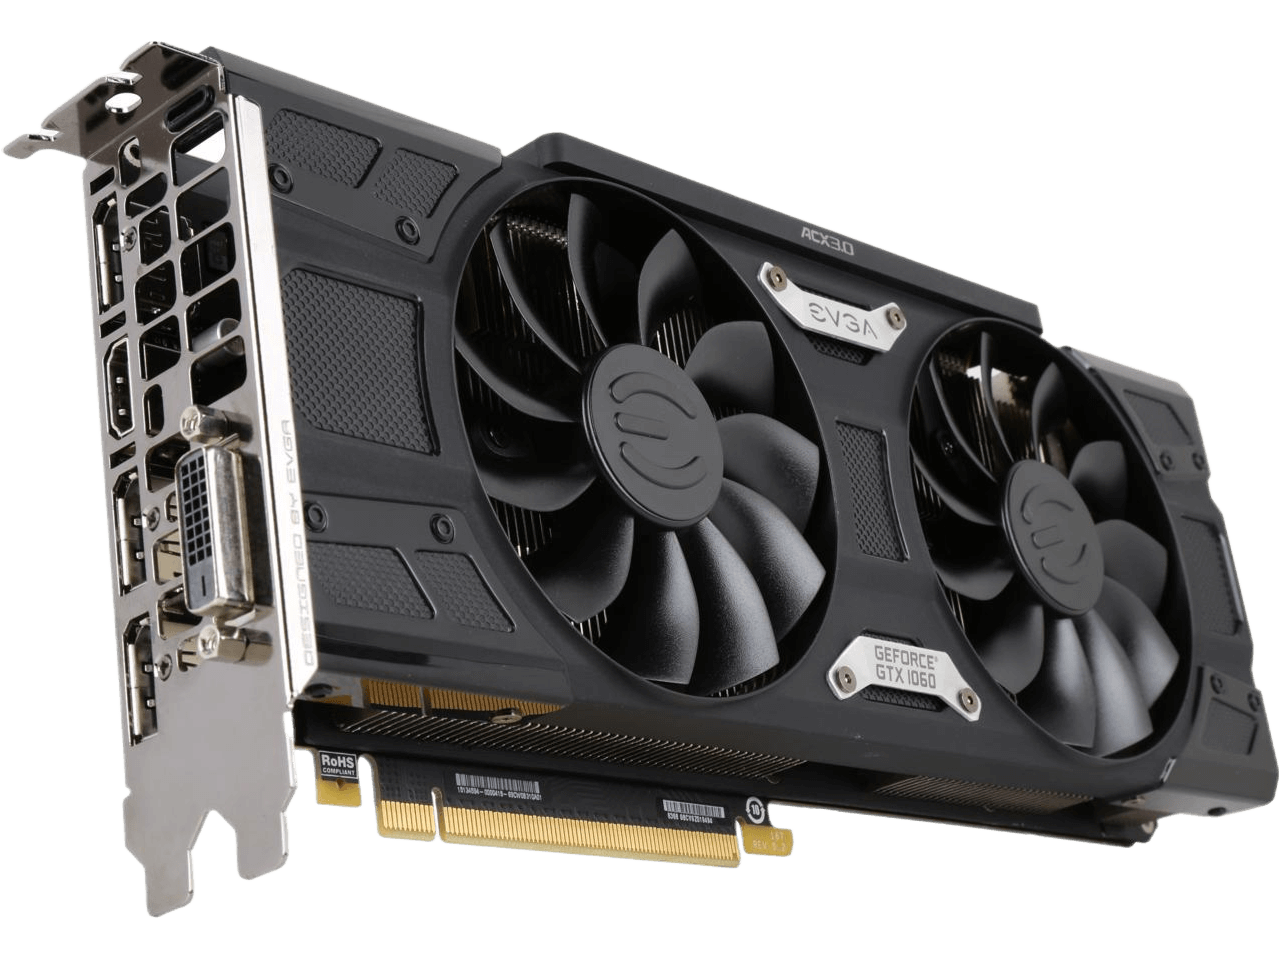 EVGA GeForce GTX 1060 6GB FTW DT GAMING ACX 3.0 6GB GDDR5 LED DX12 OSD Support (PXOC) Video Graphics Card 06G-P4-6266-KR